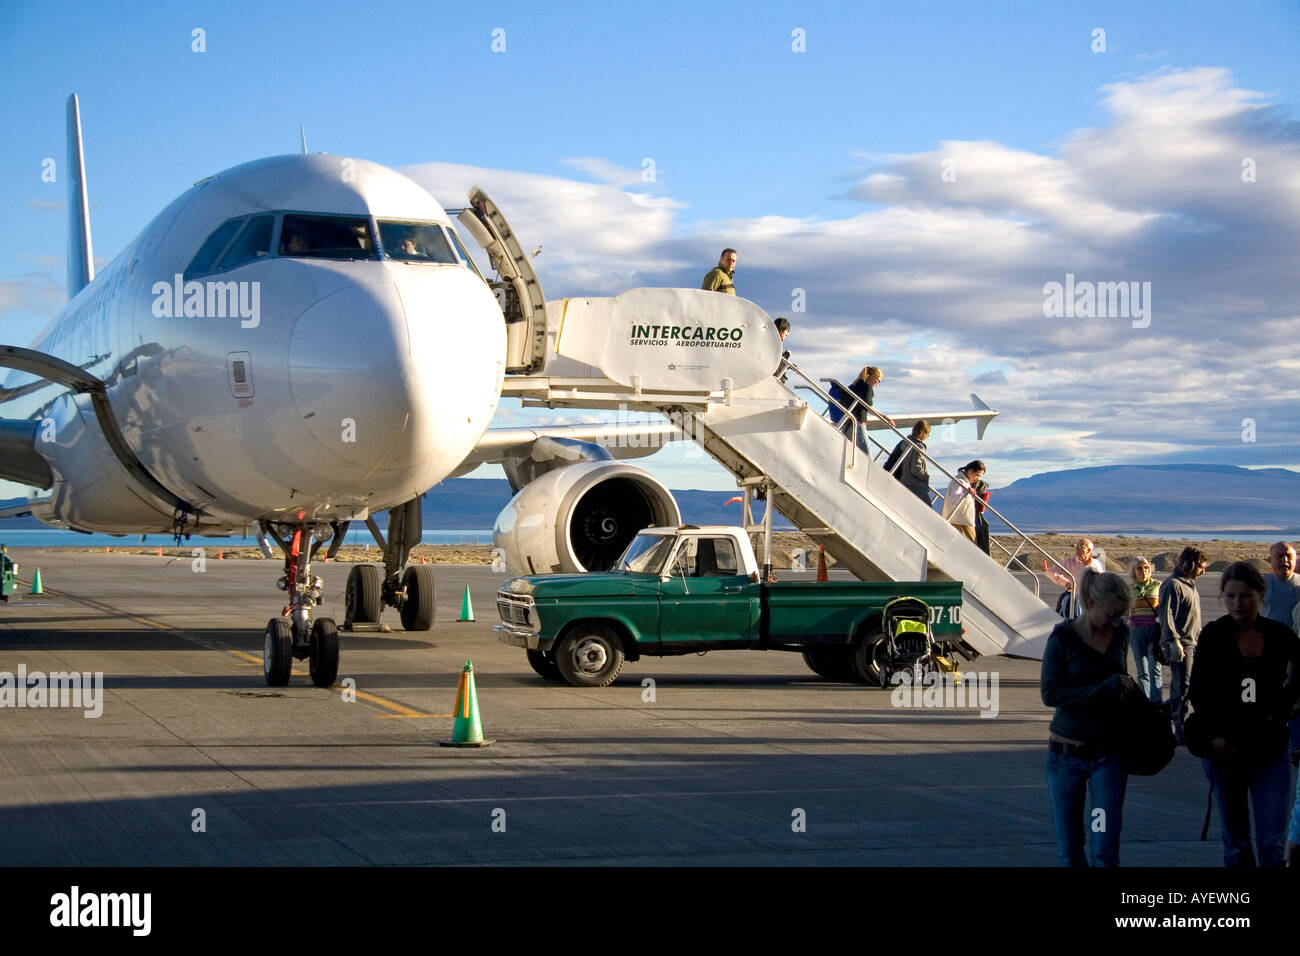 El Calafate International Airport High Resolution Stock Photography and  Images - Alamy